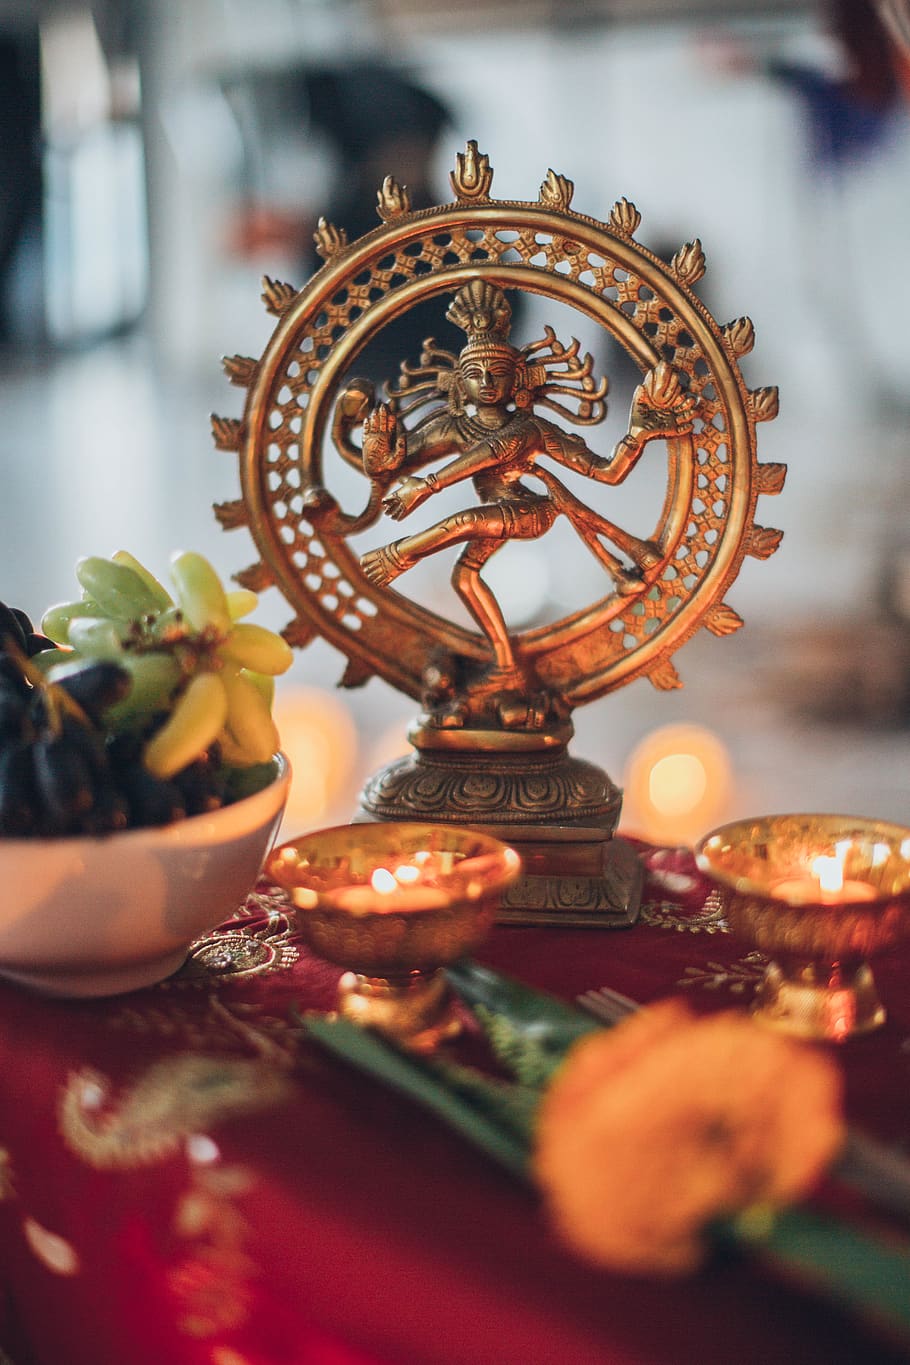 HD wallpaper: Shiva Nataraja Figurine Surrounded by Lighted Tealights,  blurred background | Wallpaper Flare